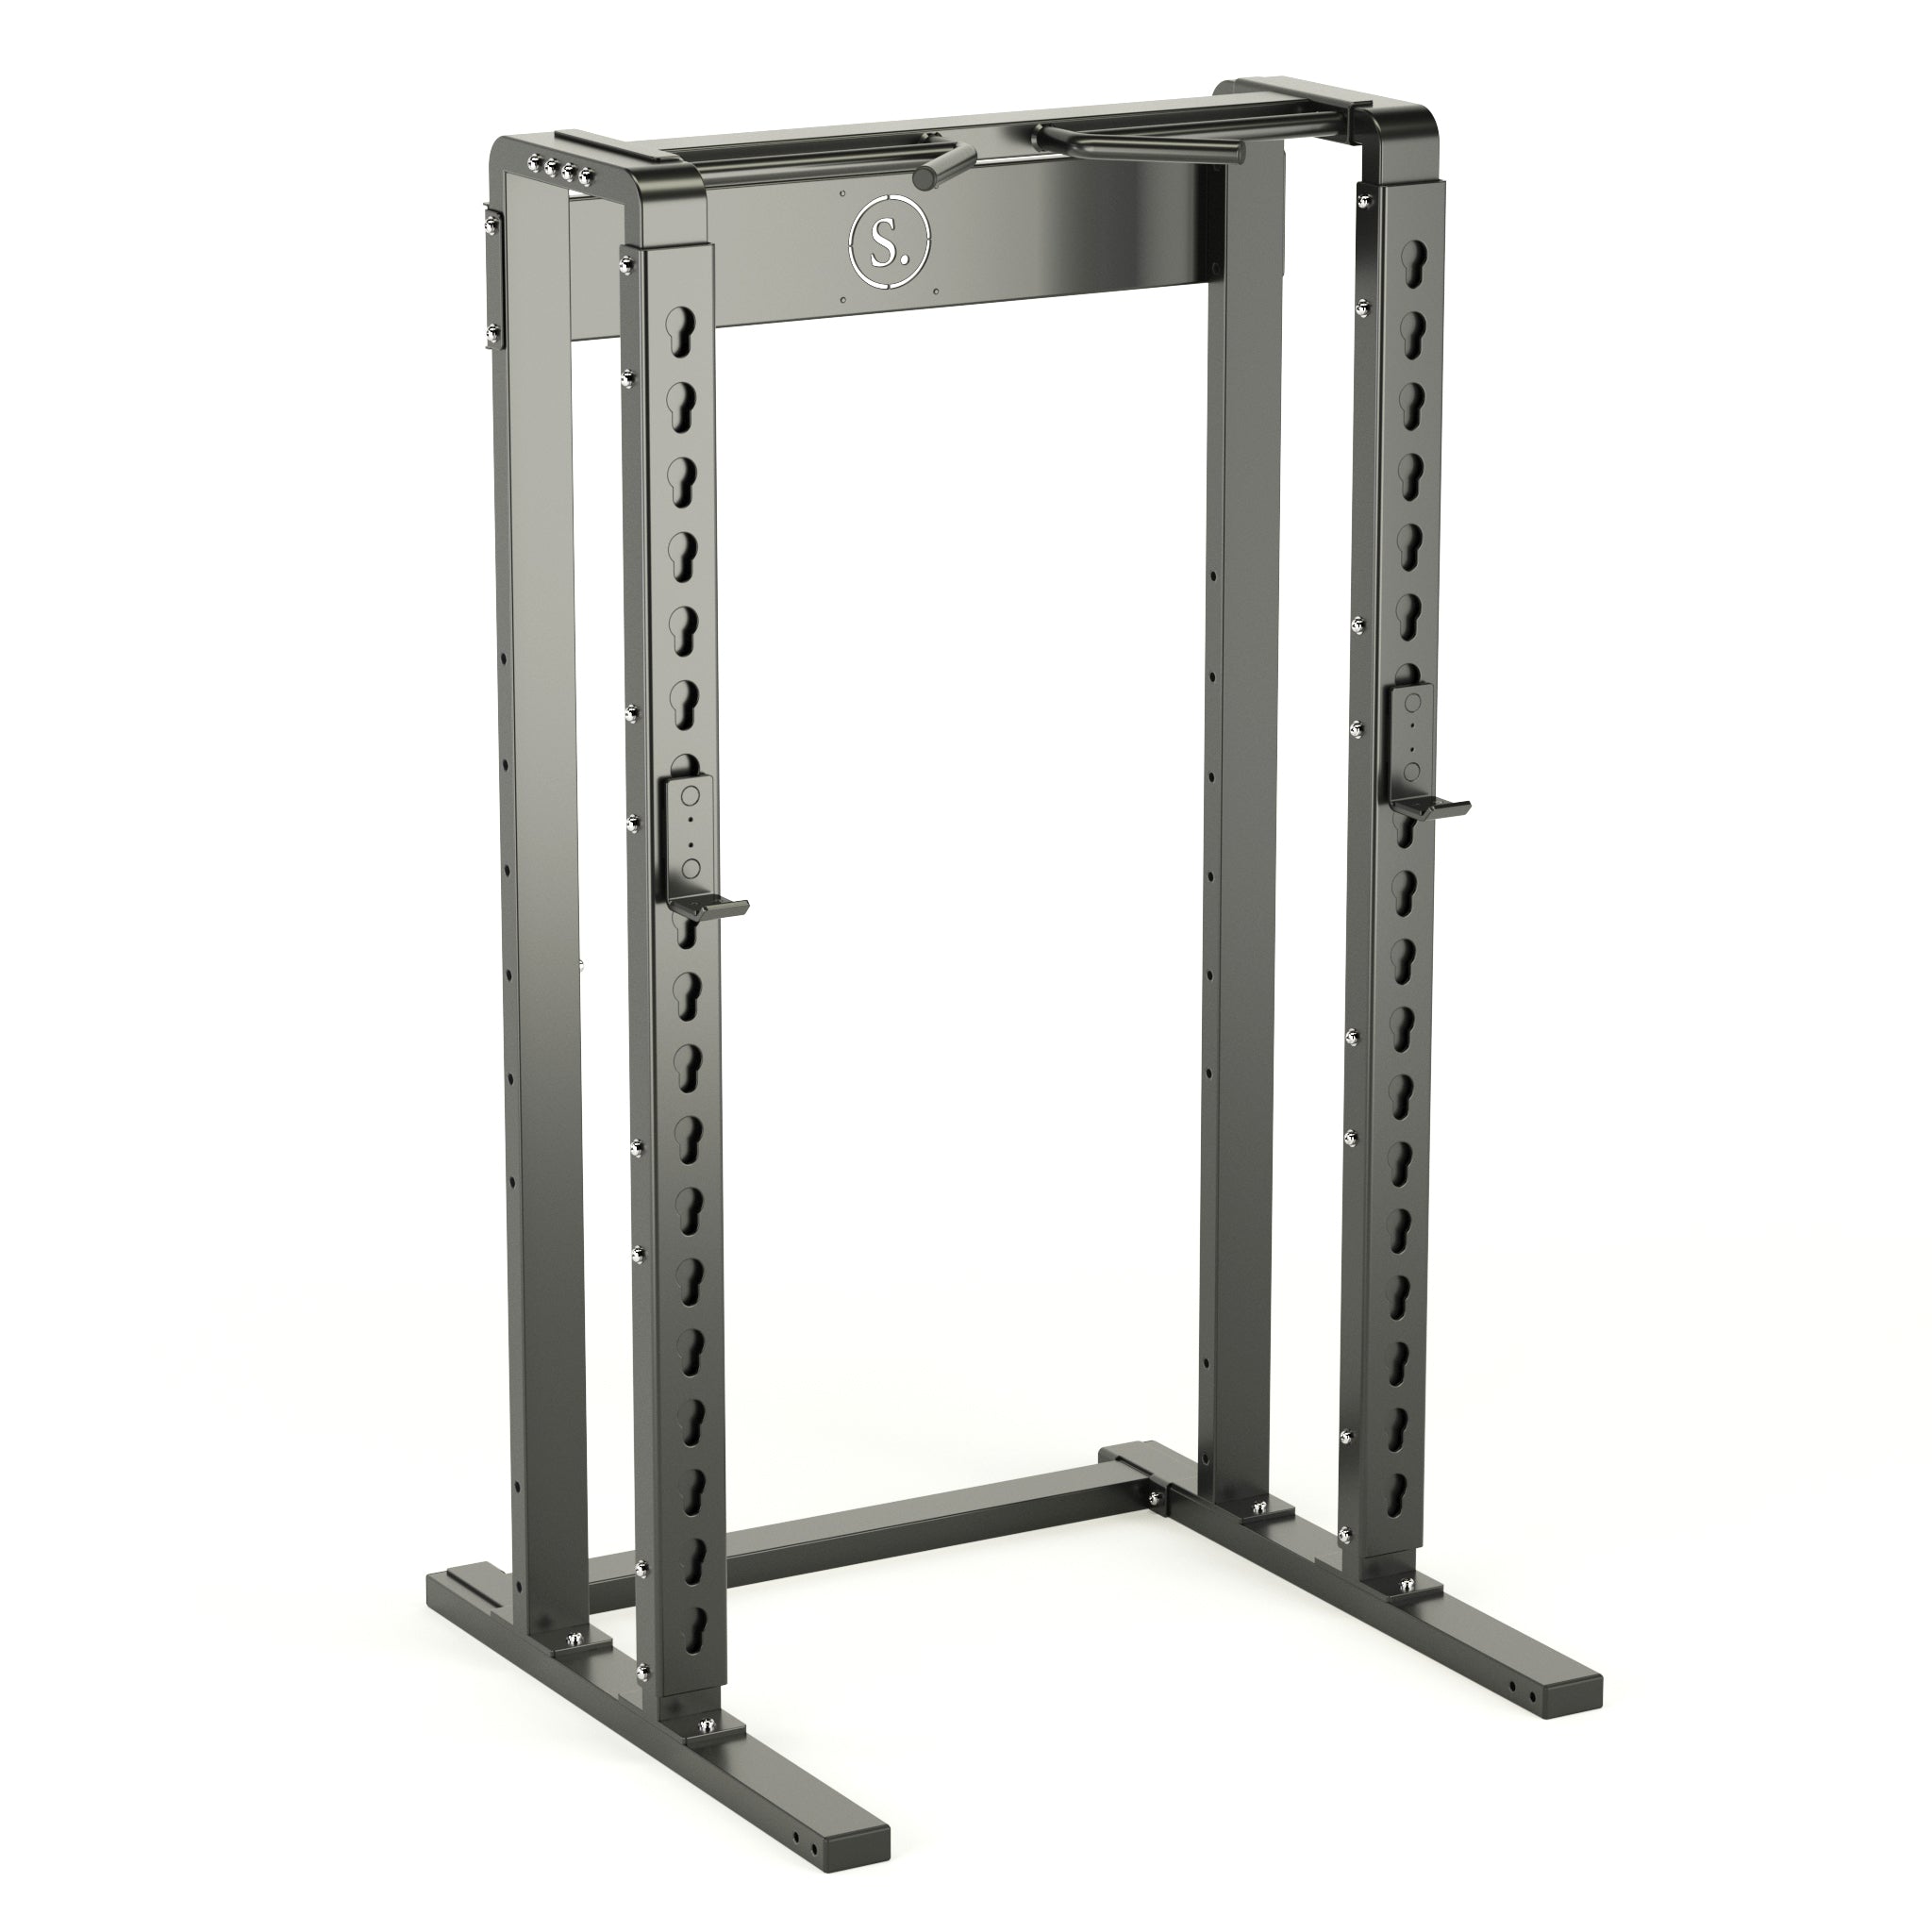 Solo Squat Rack in black with multi-grip pull-up